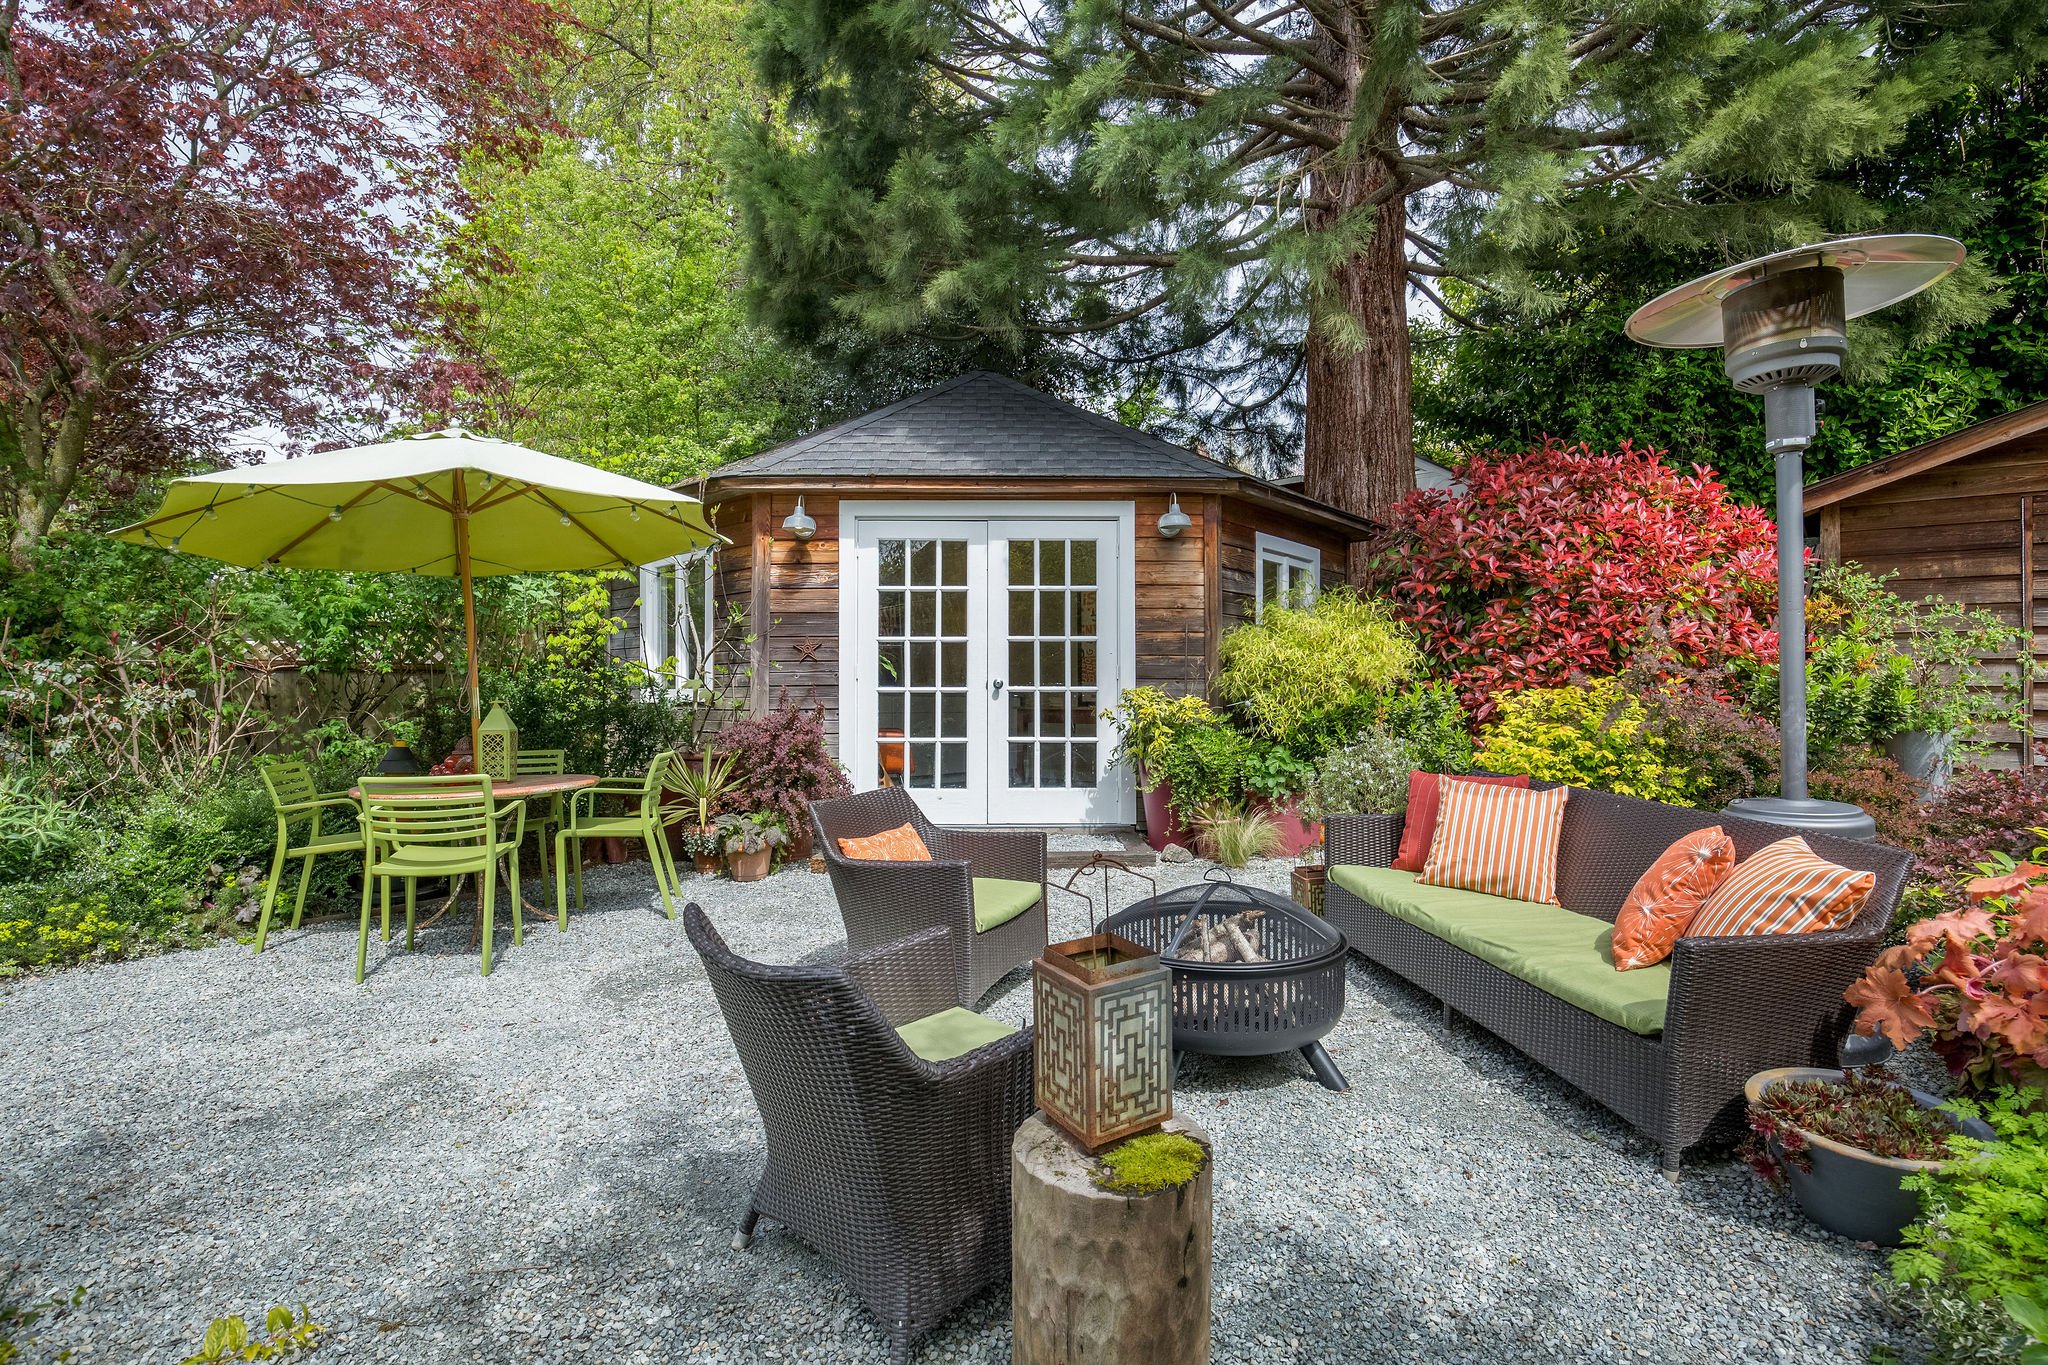  image description: exterior of patio with fire pit, patio furniture and shed 